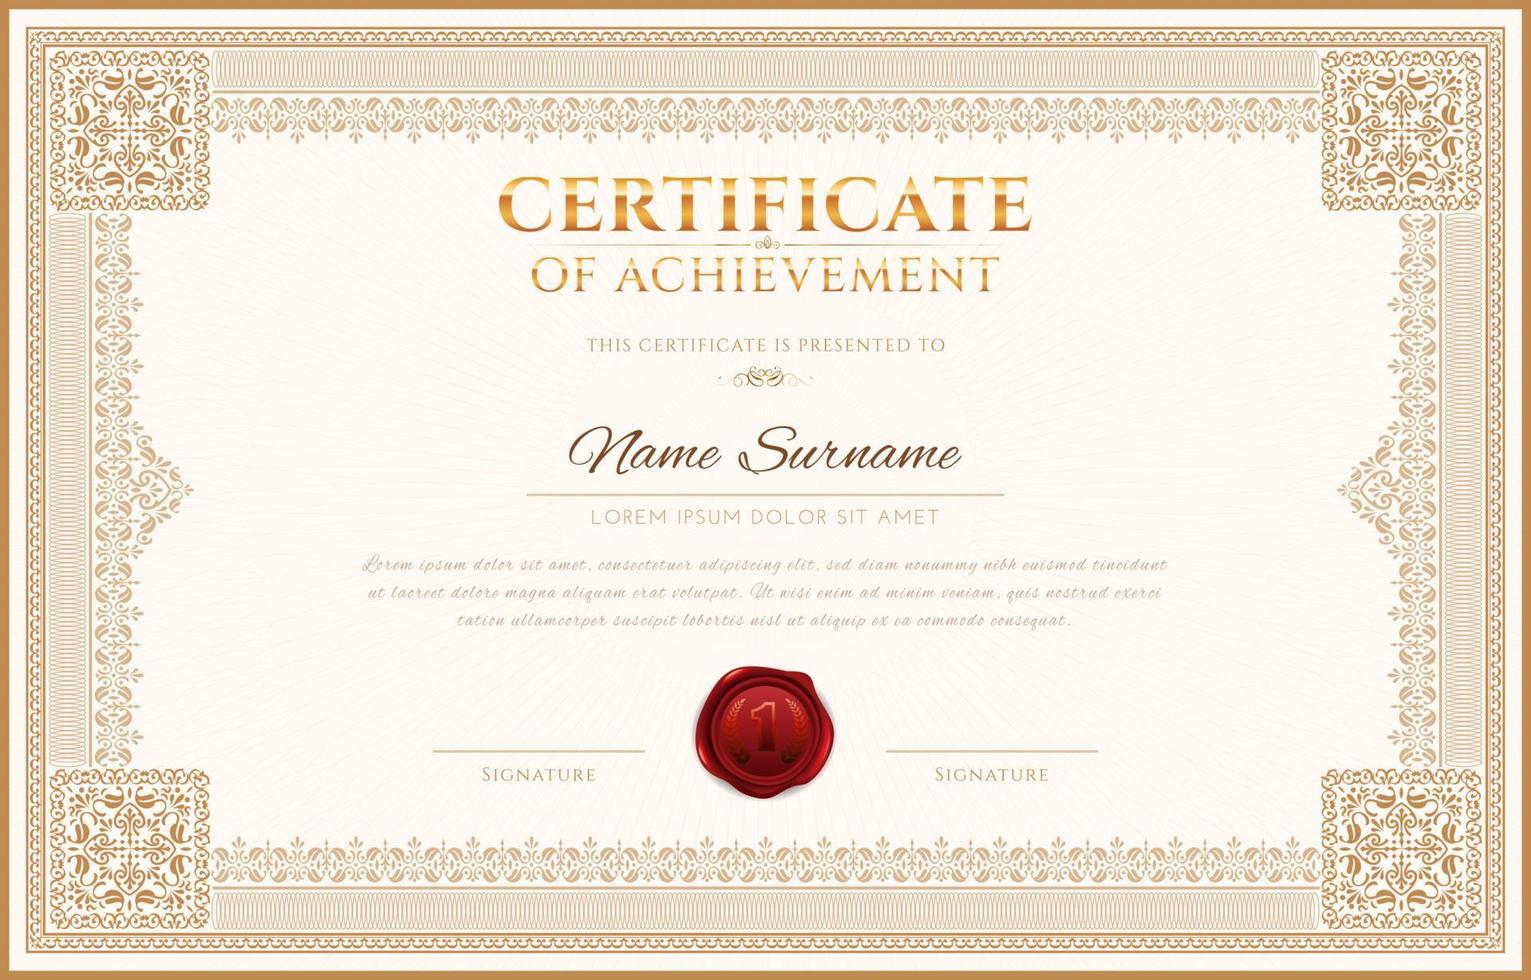 Professional Certificate of Achievement for Education Template vector